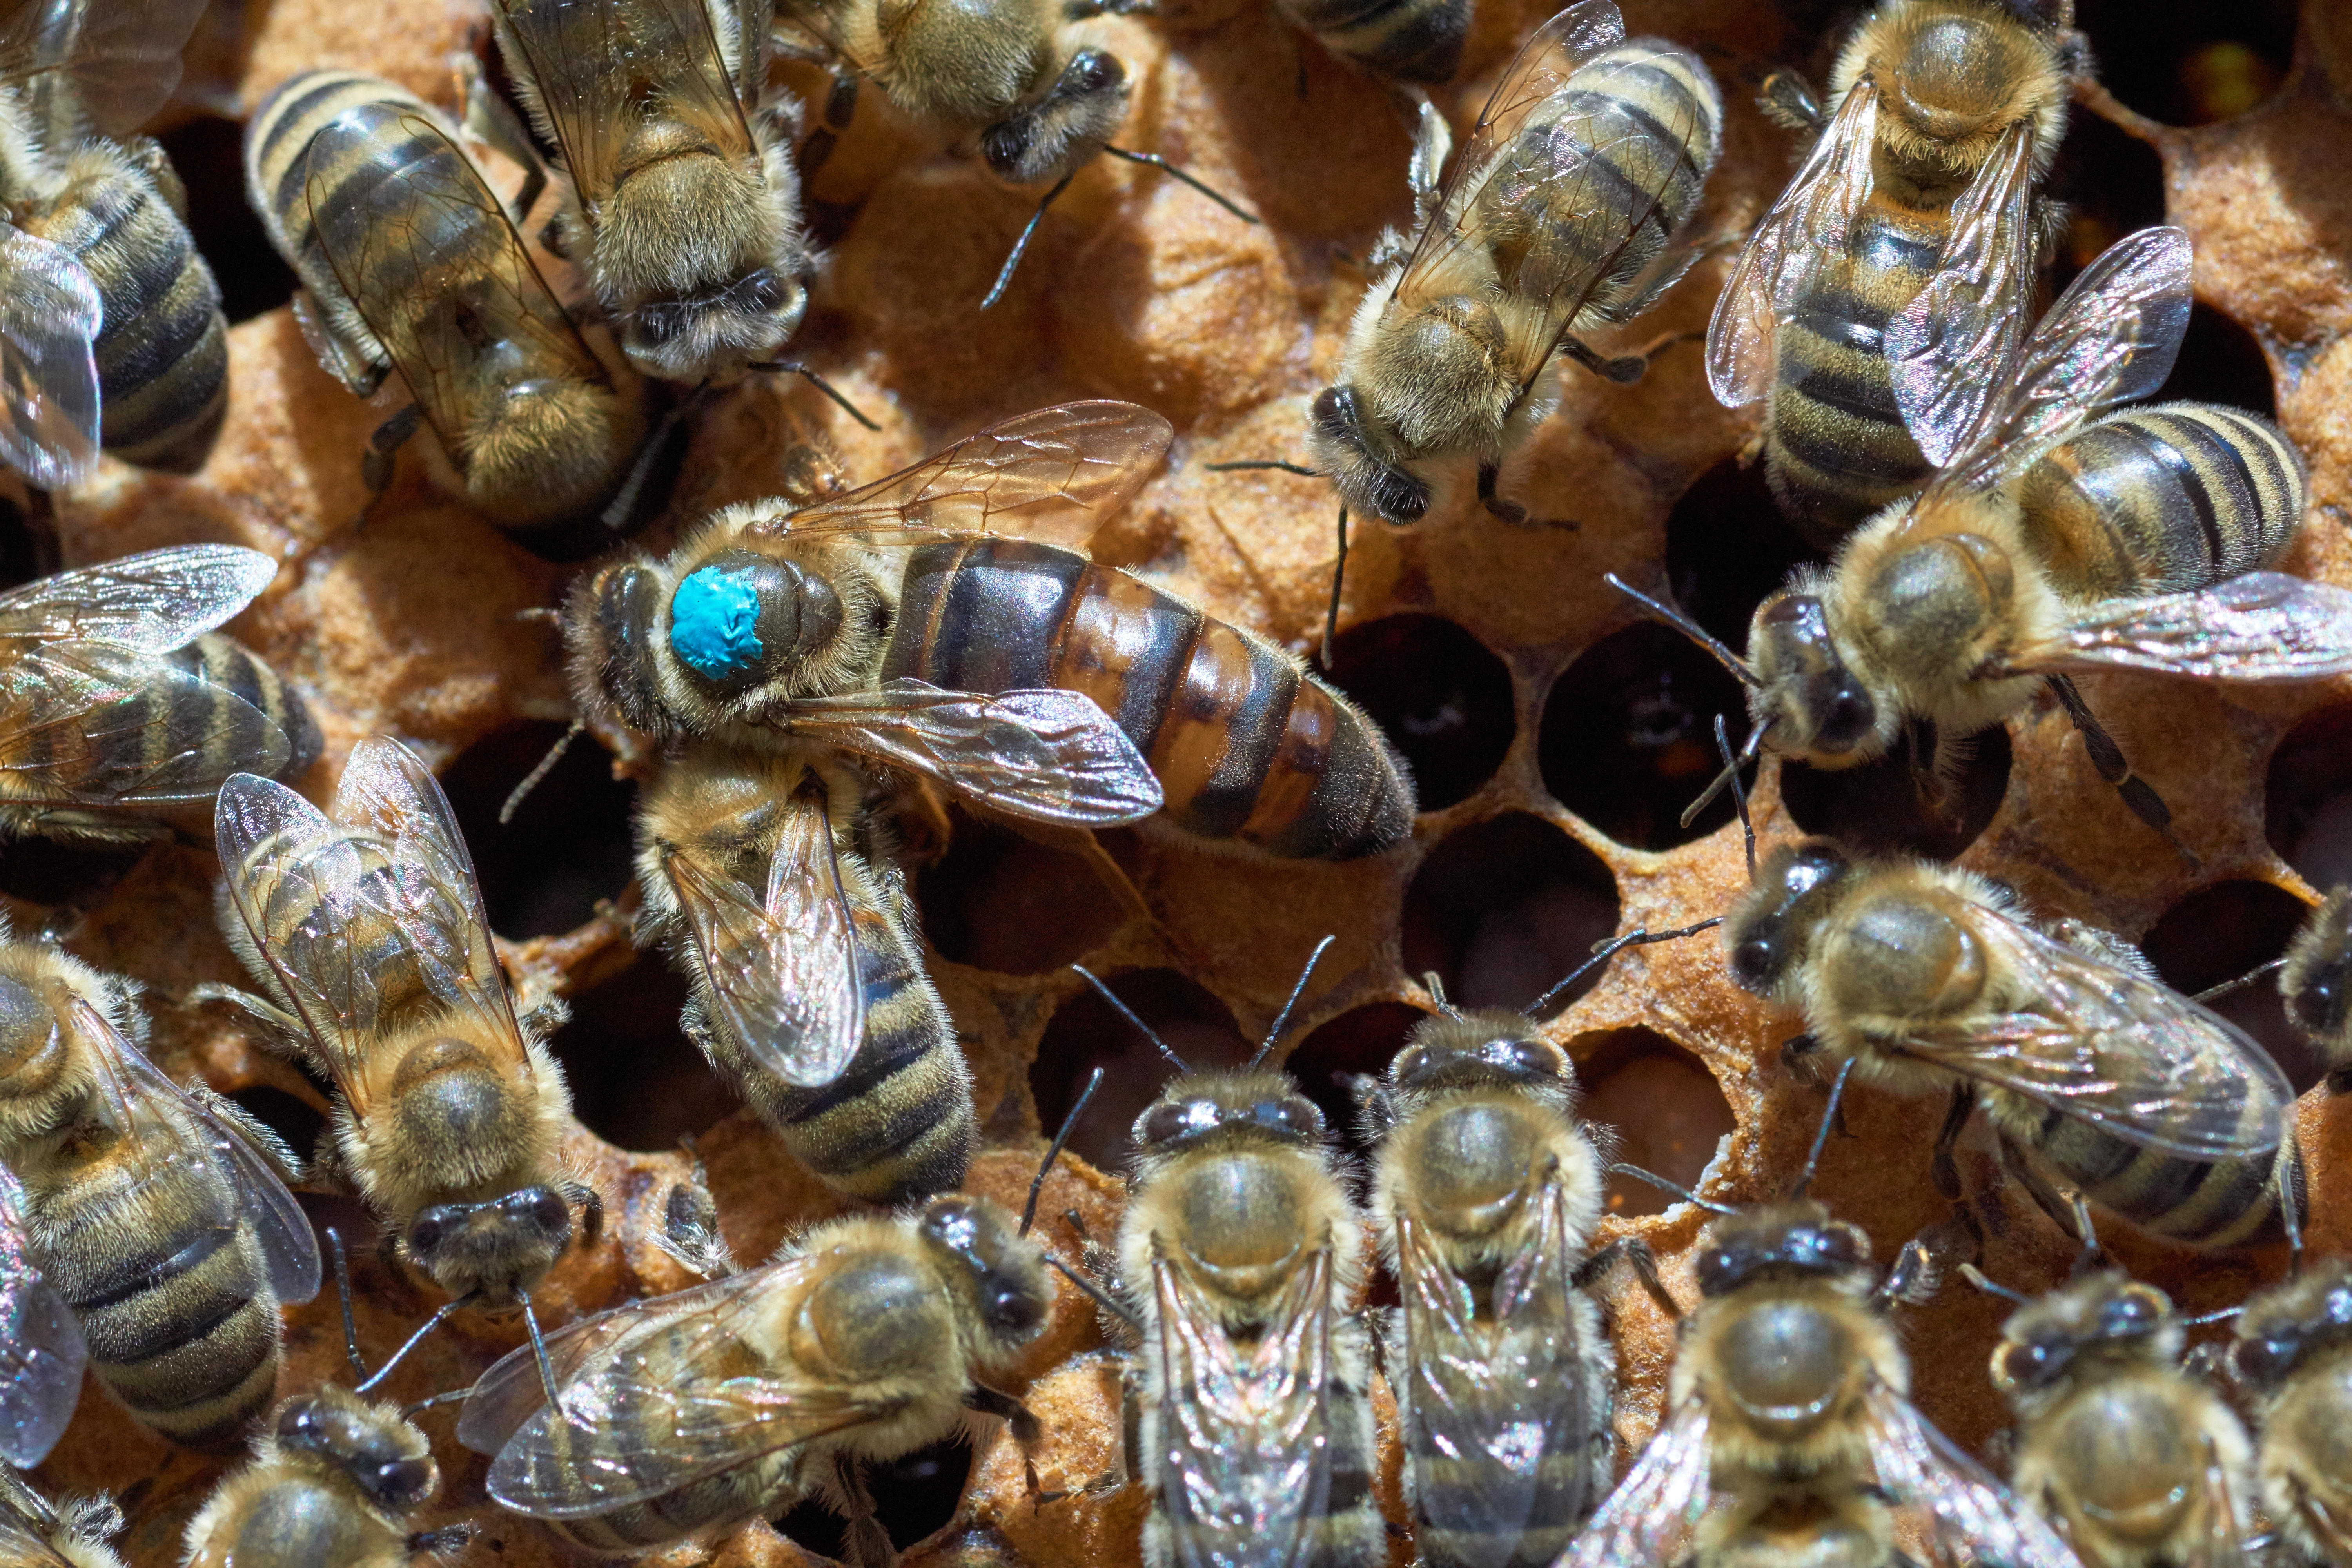 Larger queen bee marked with blue paint among smaller worker dones